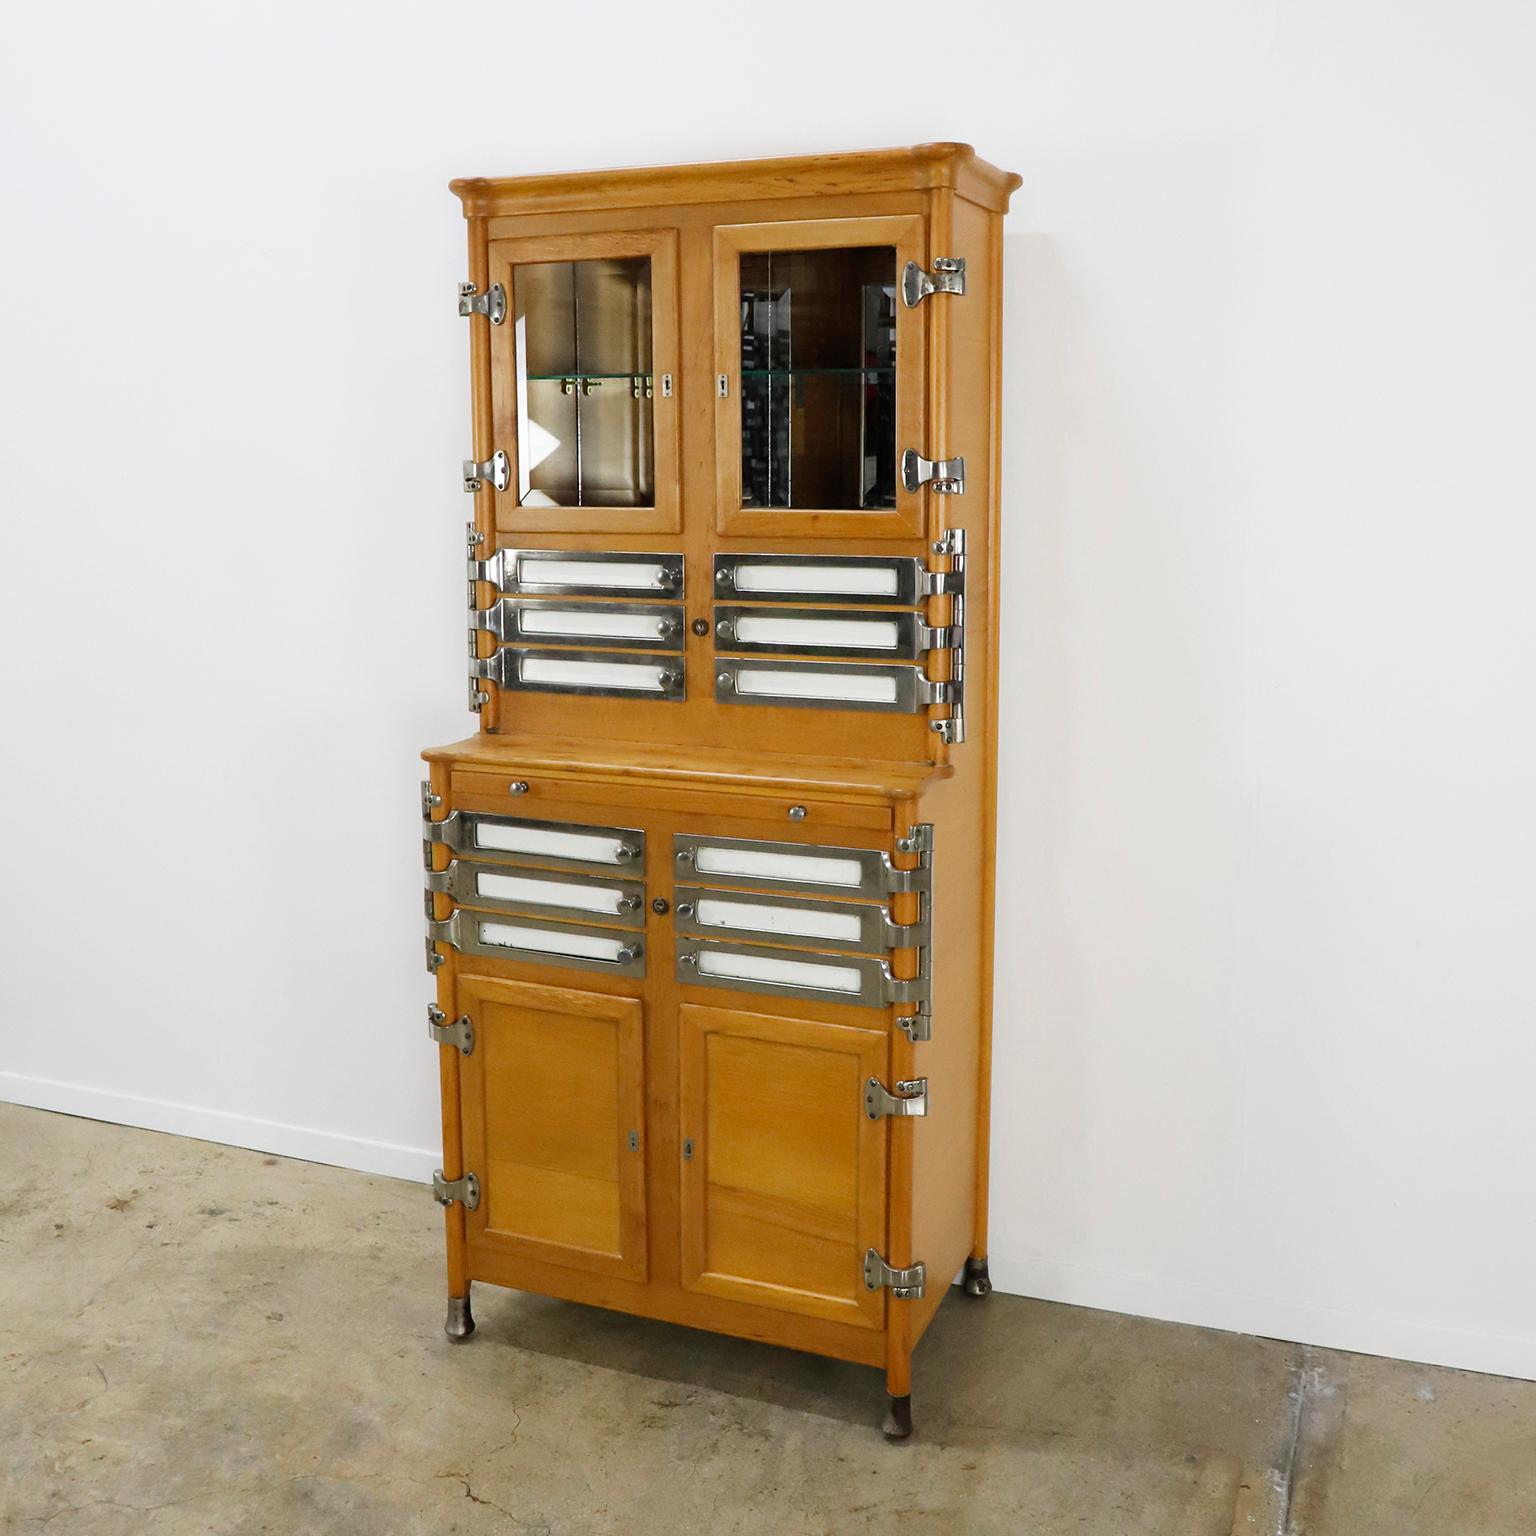 We offer this fantastic Dentist's or medical cabinet in wood and metal dating to circa 1910 by Arnold Biber, Pforzheim Germany, in excellent condition. The unique style of the sculpted top and swing-out trays were this companies signature